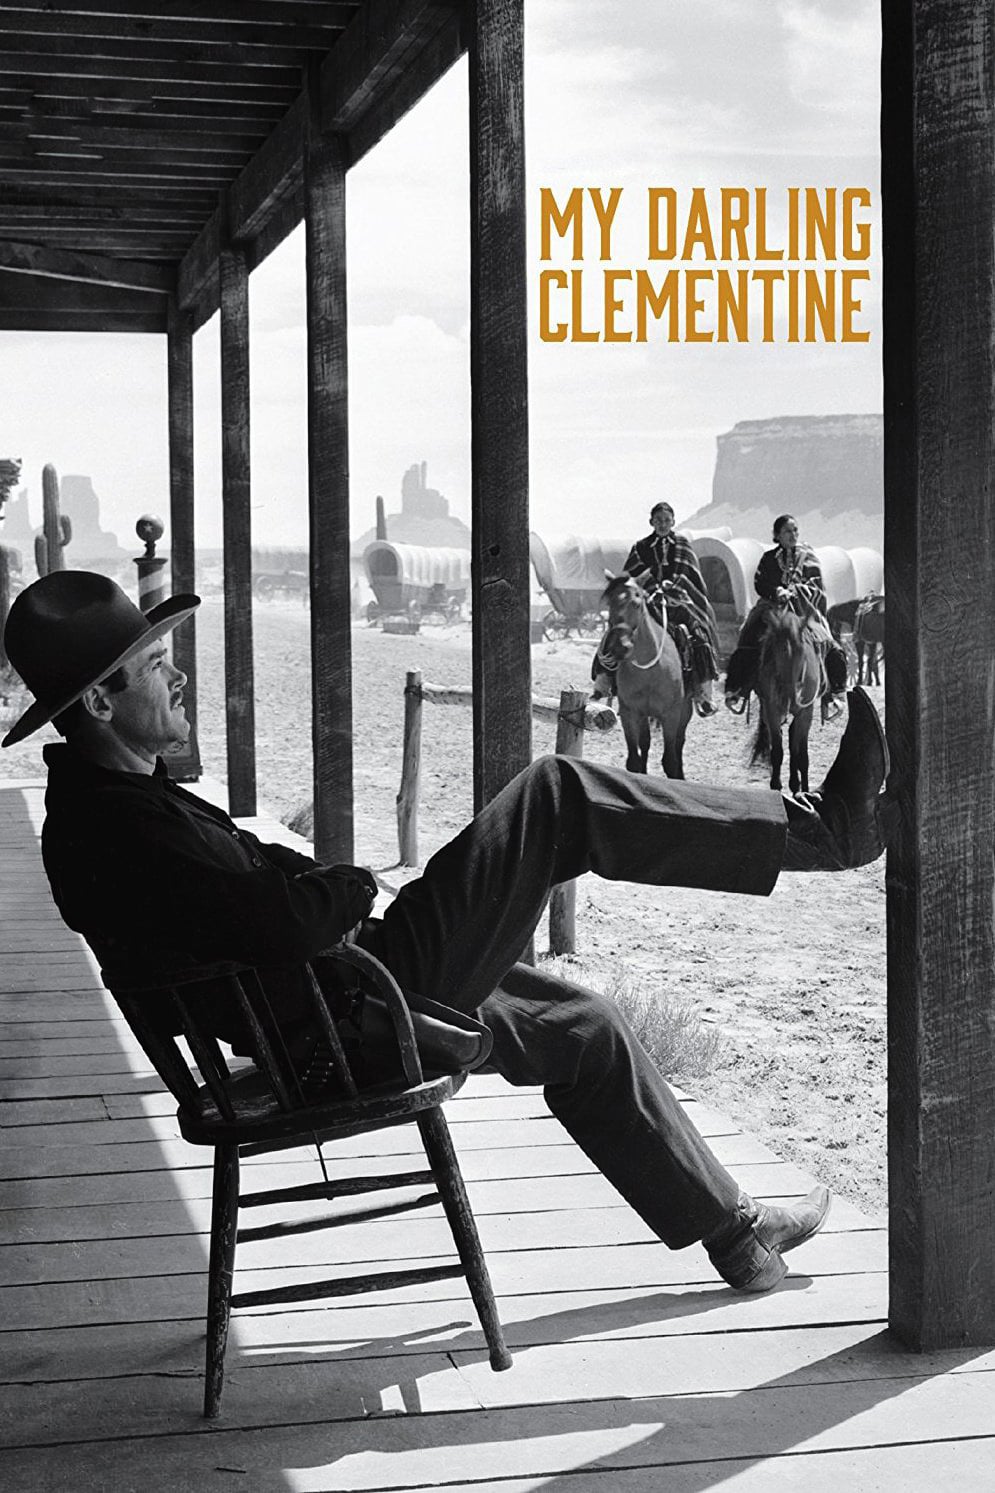 Poster for the movie "My Darling Clementine"